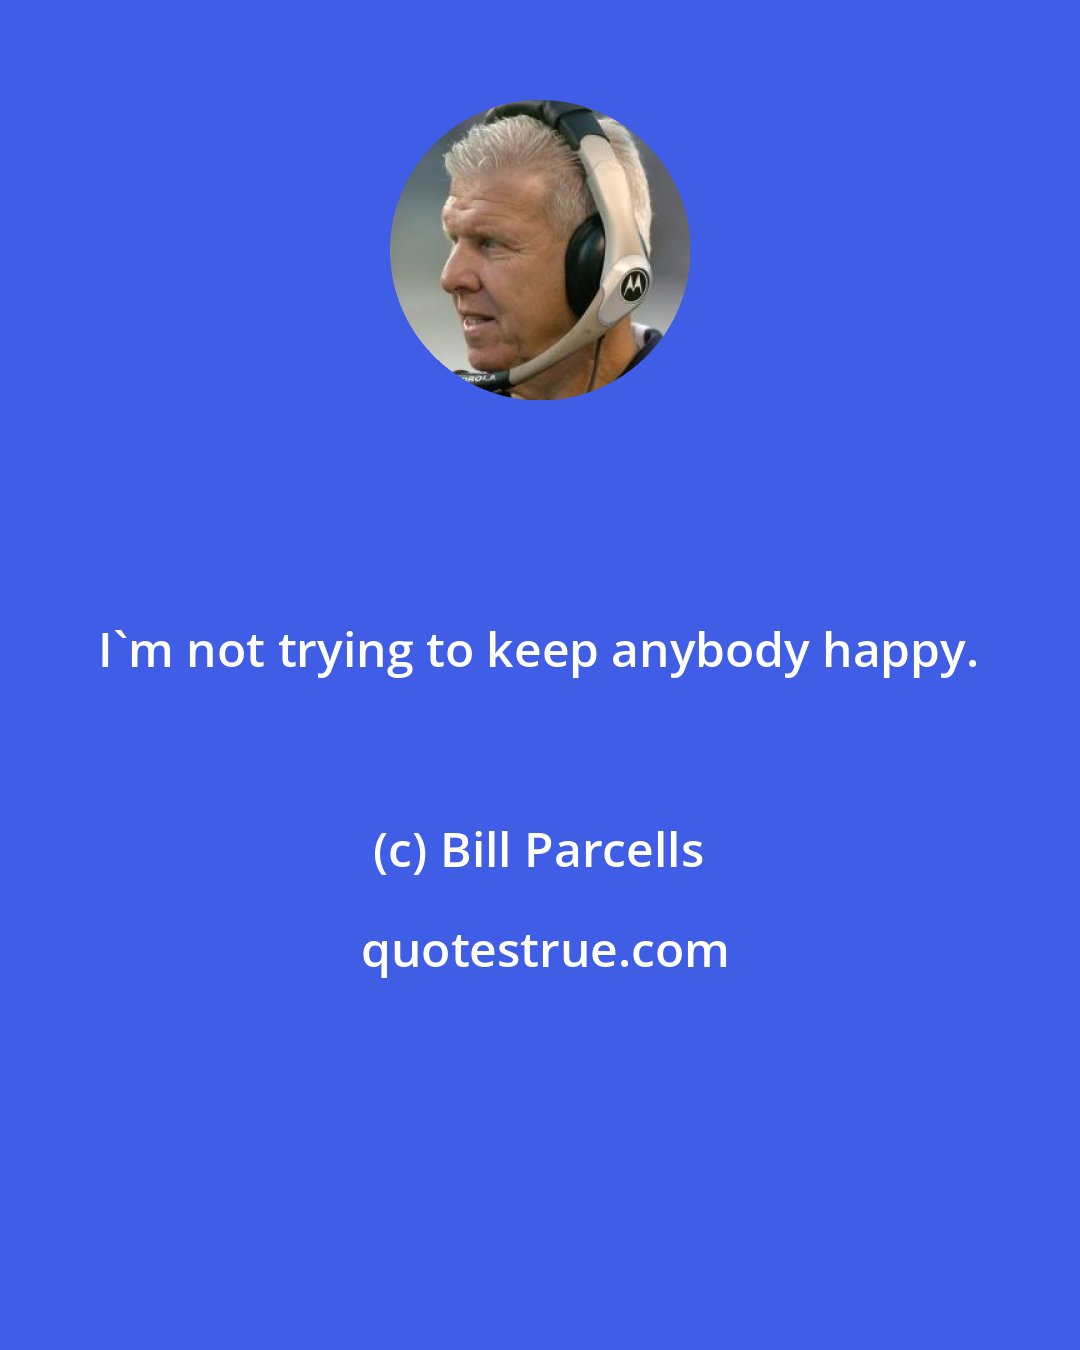 Bill Parcells: I'm not trying to keep anybody happy.